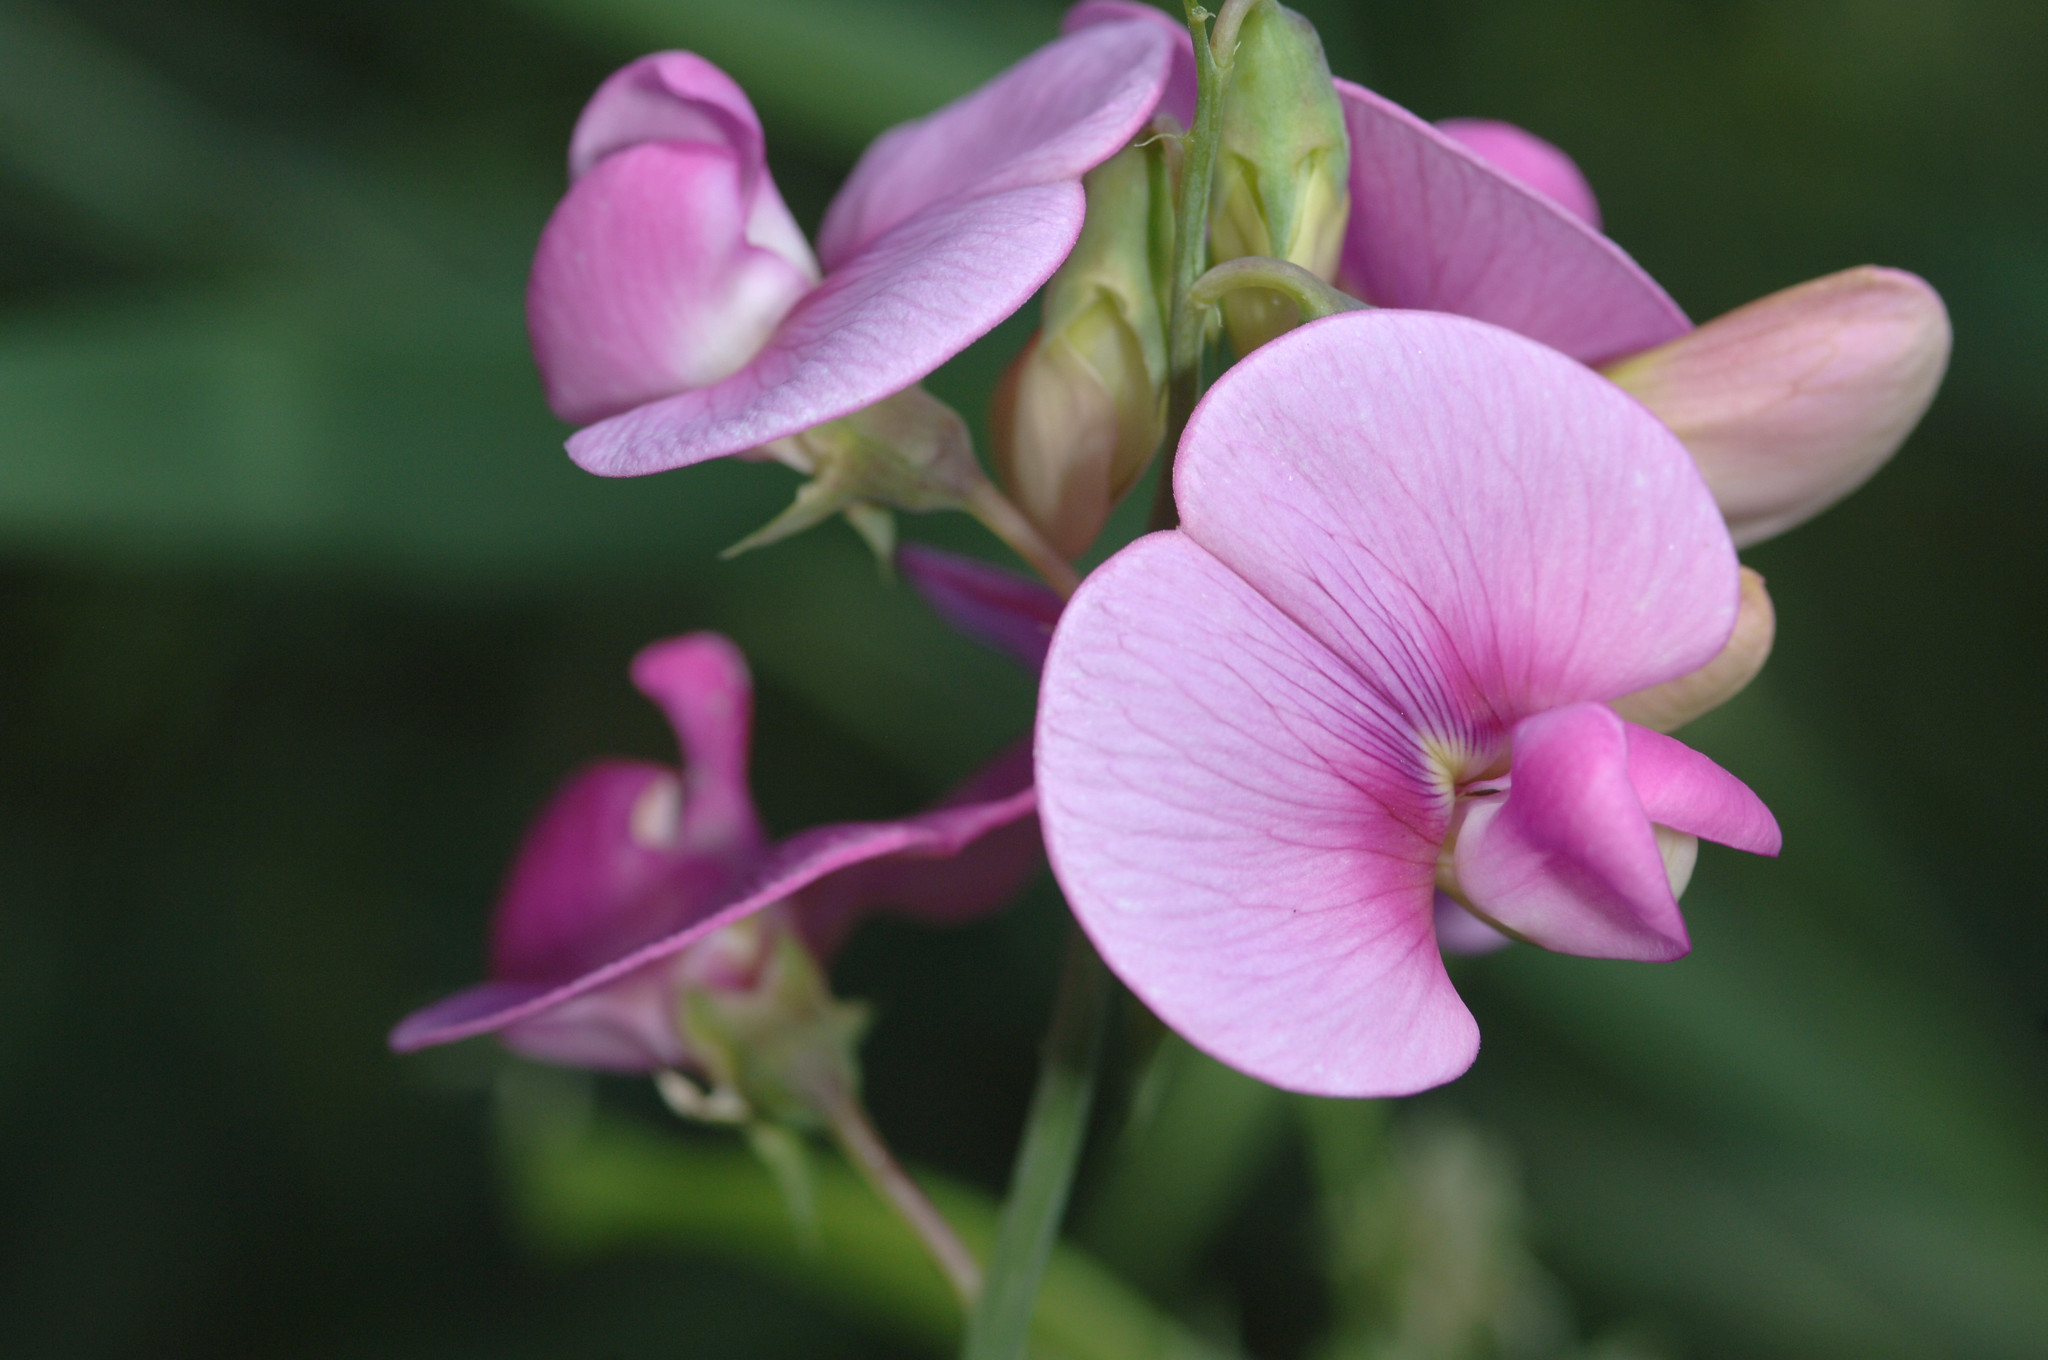 Old-fashioned sweet peas fill the garden with fragrance